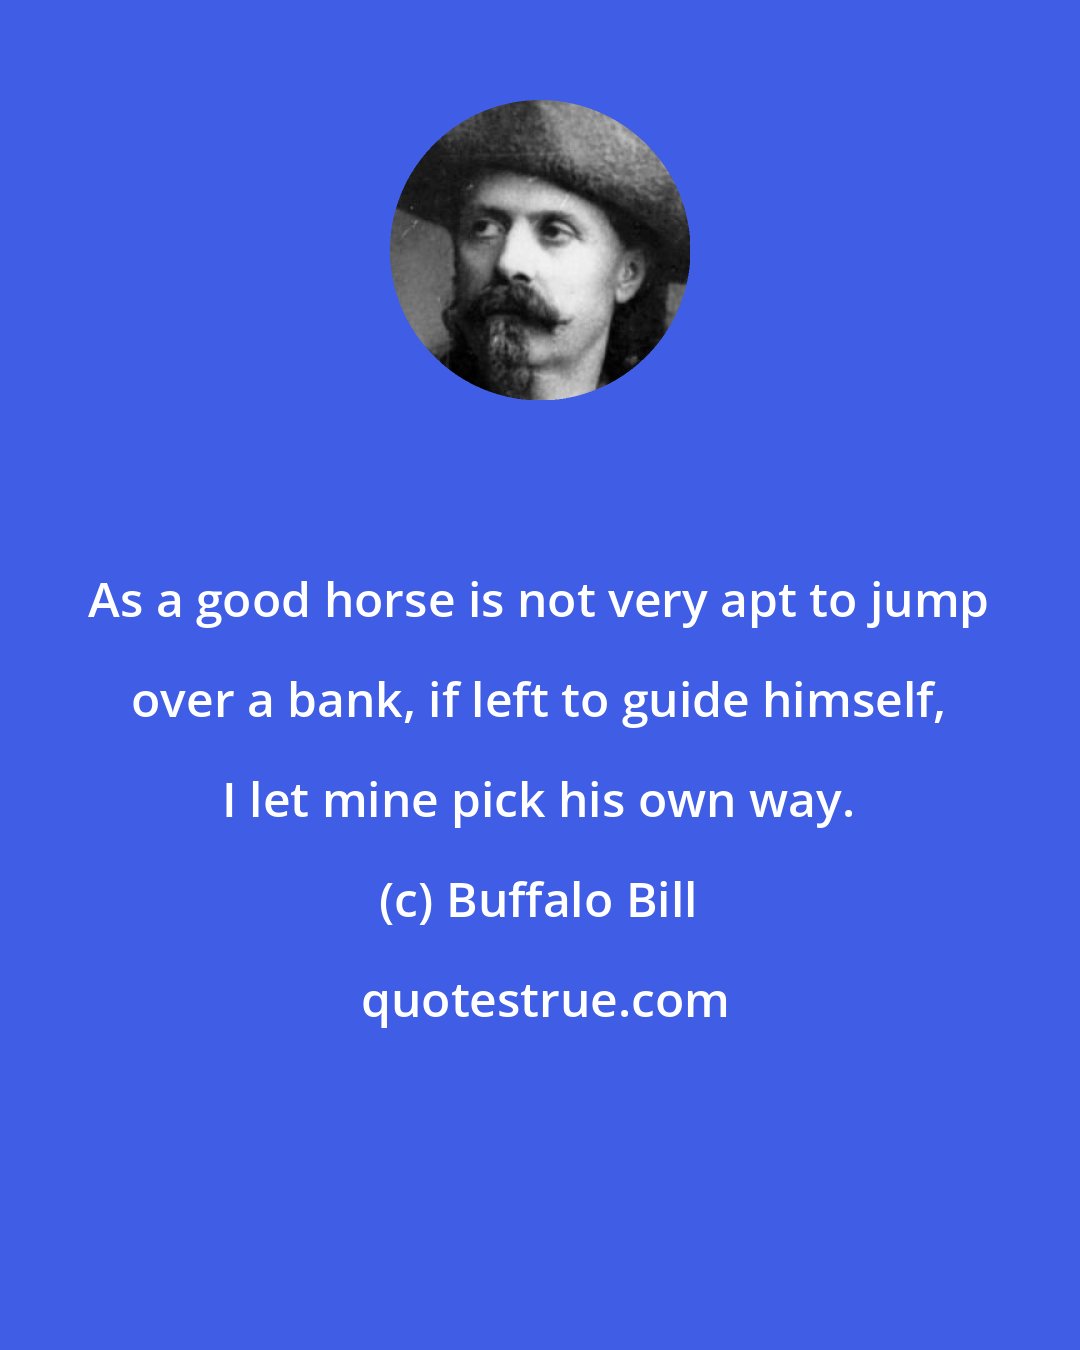 Buffalo Bill: As a good horse is not very apt to jump over a bank, if left to guide himself, I let mine pick his own way.